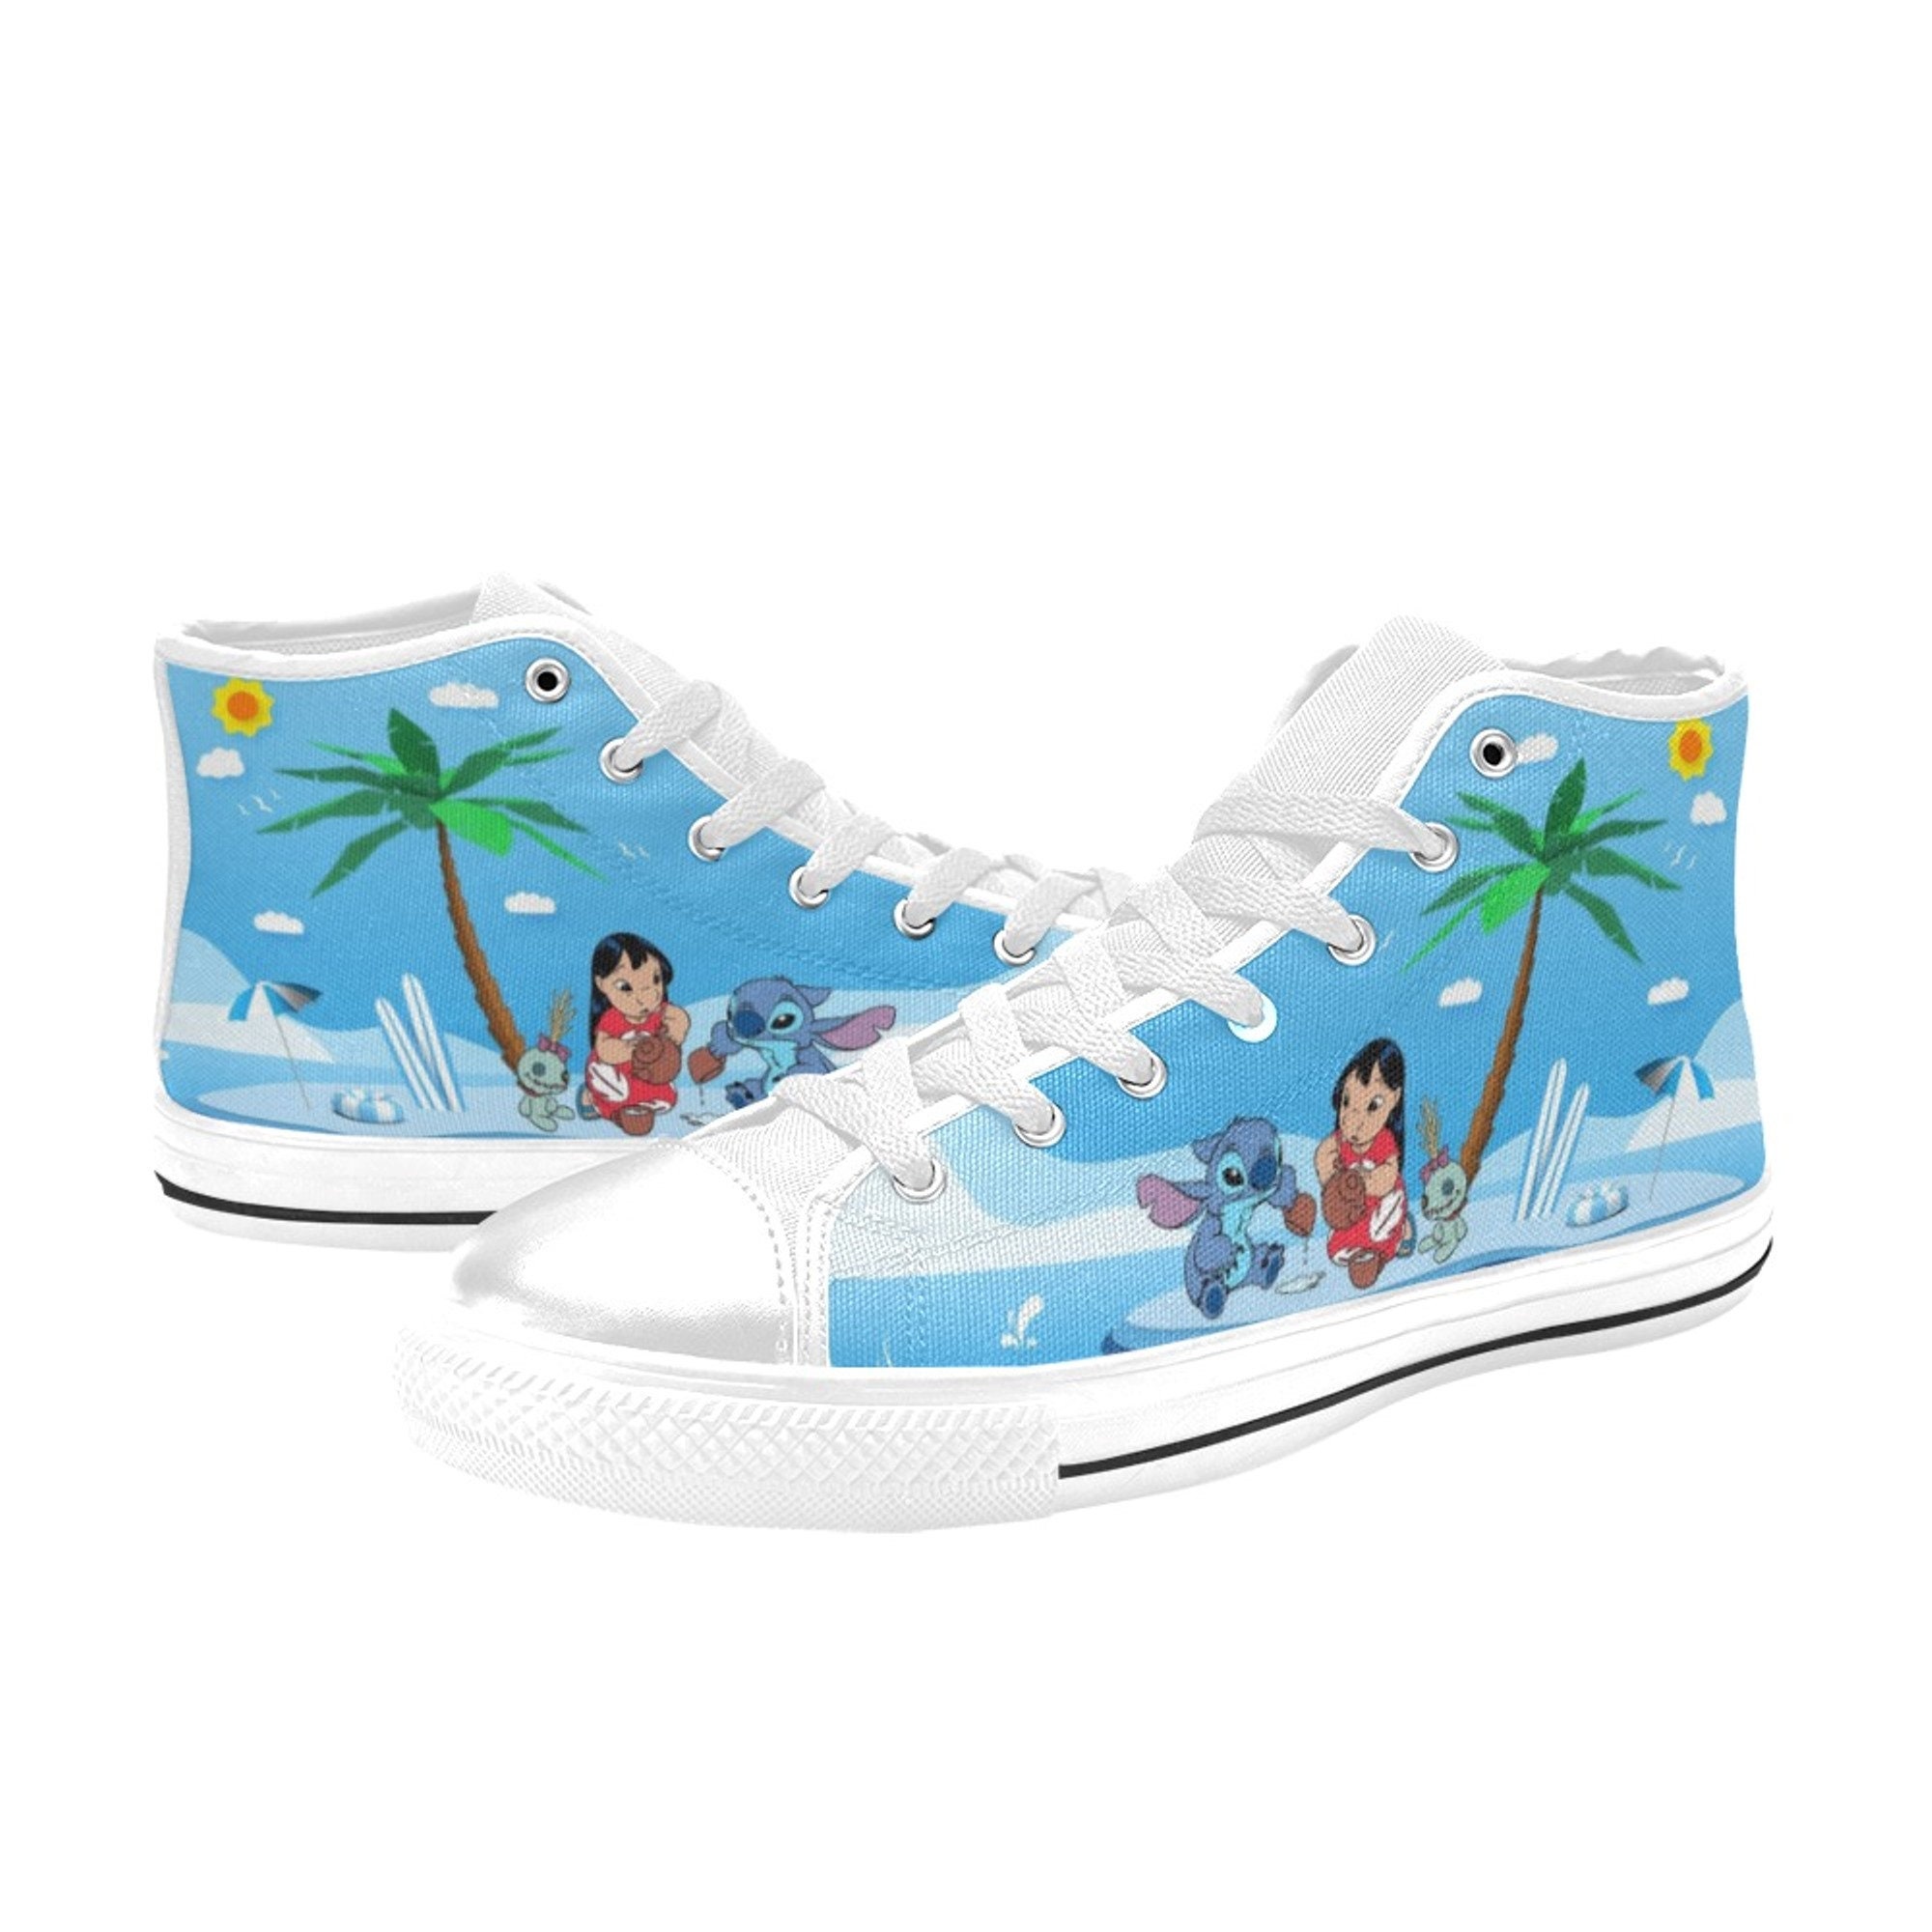 Lilo & Stitch High Top Shoes, Custom Unisex Kids and Adult Shoes